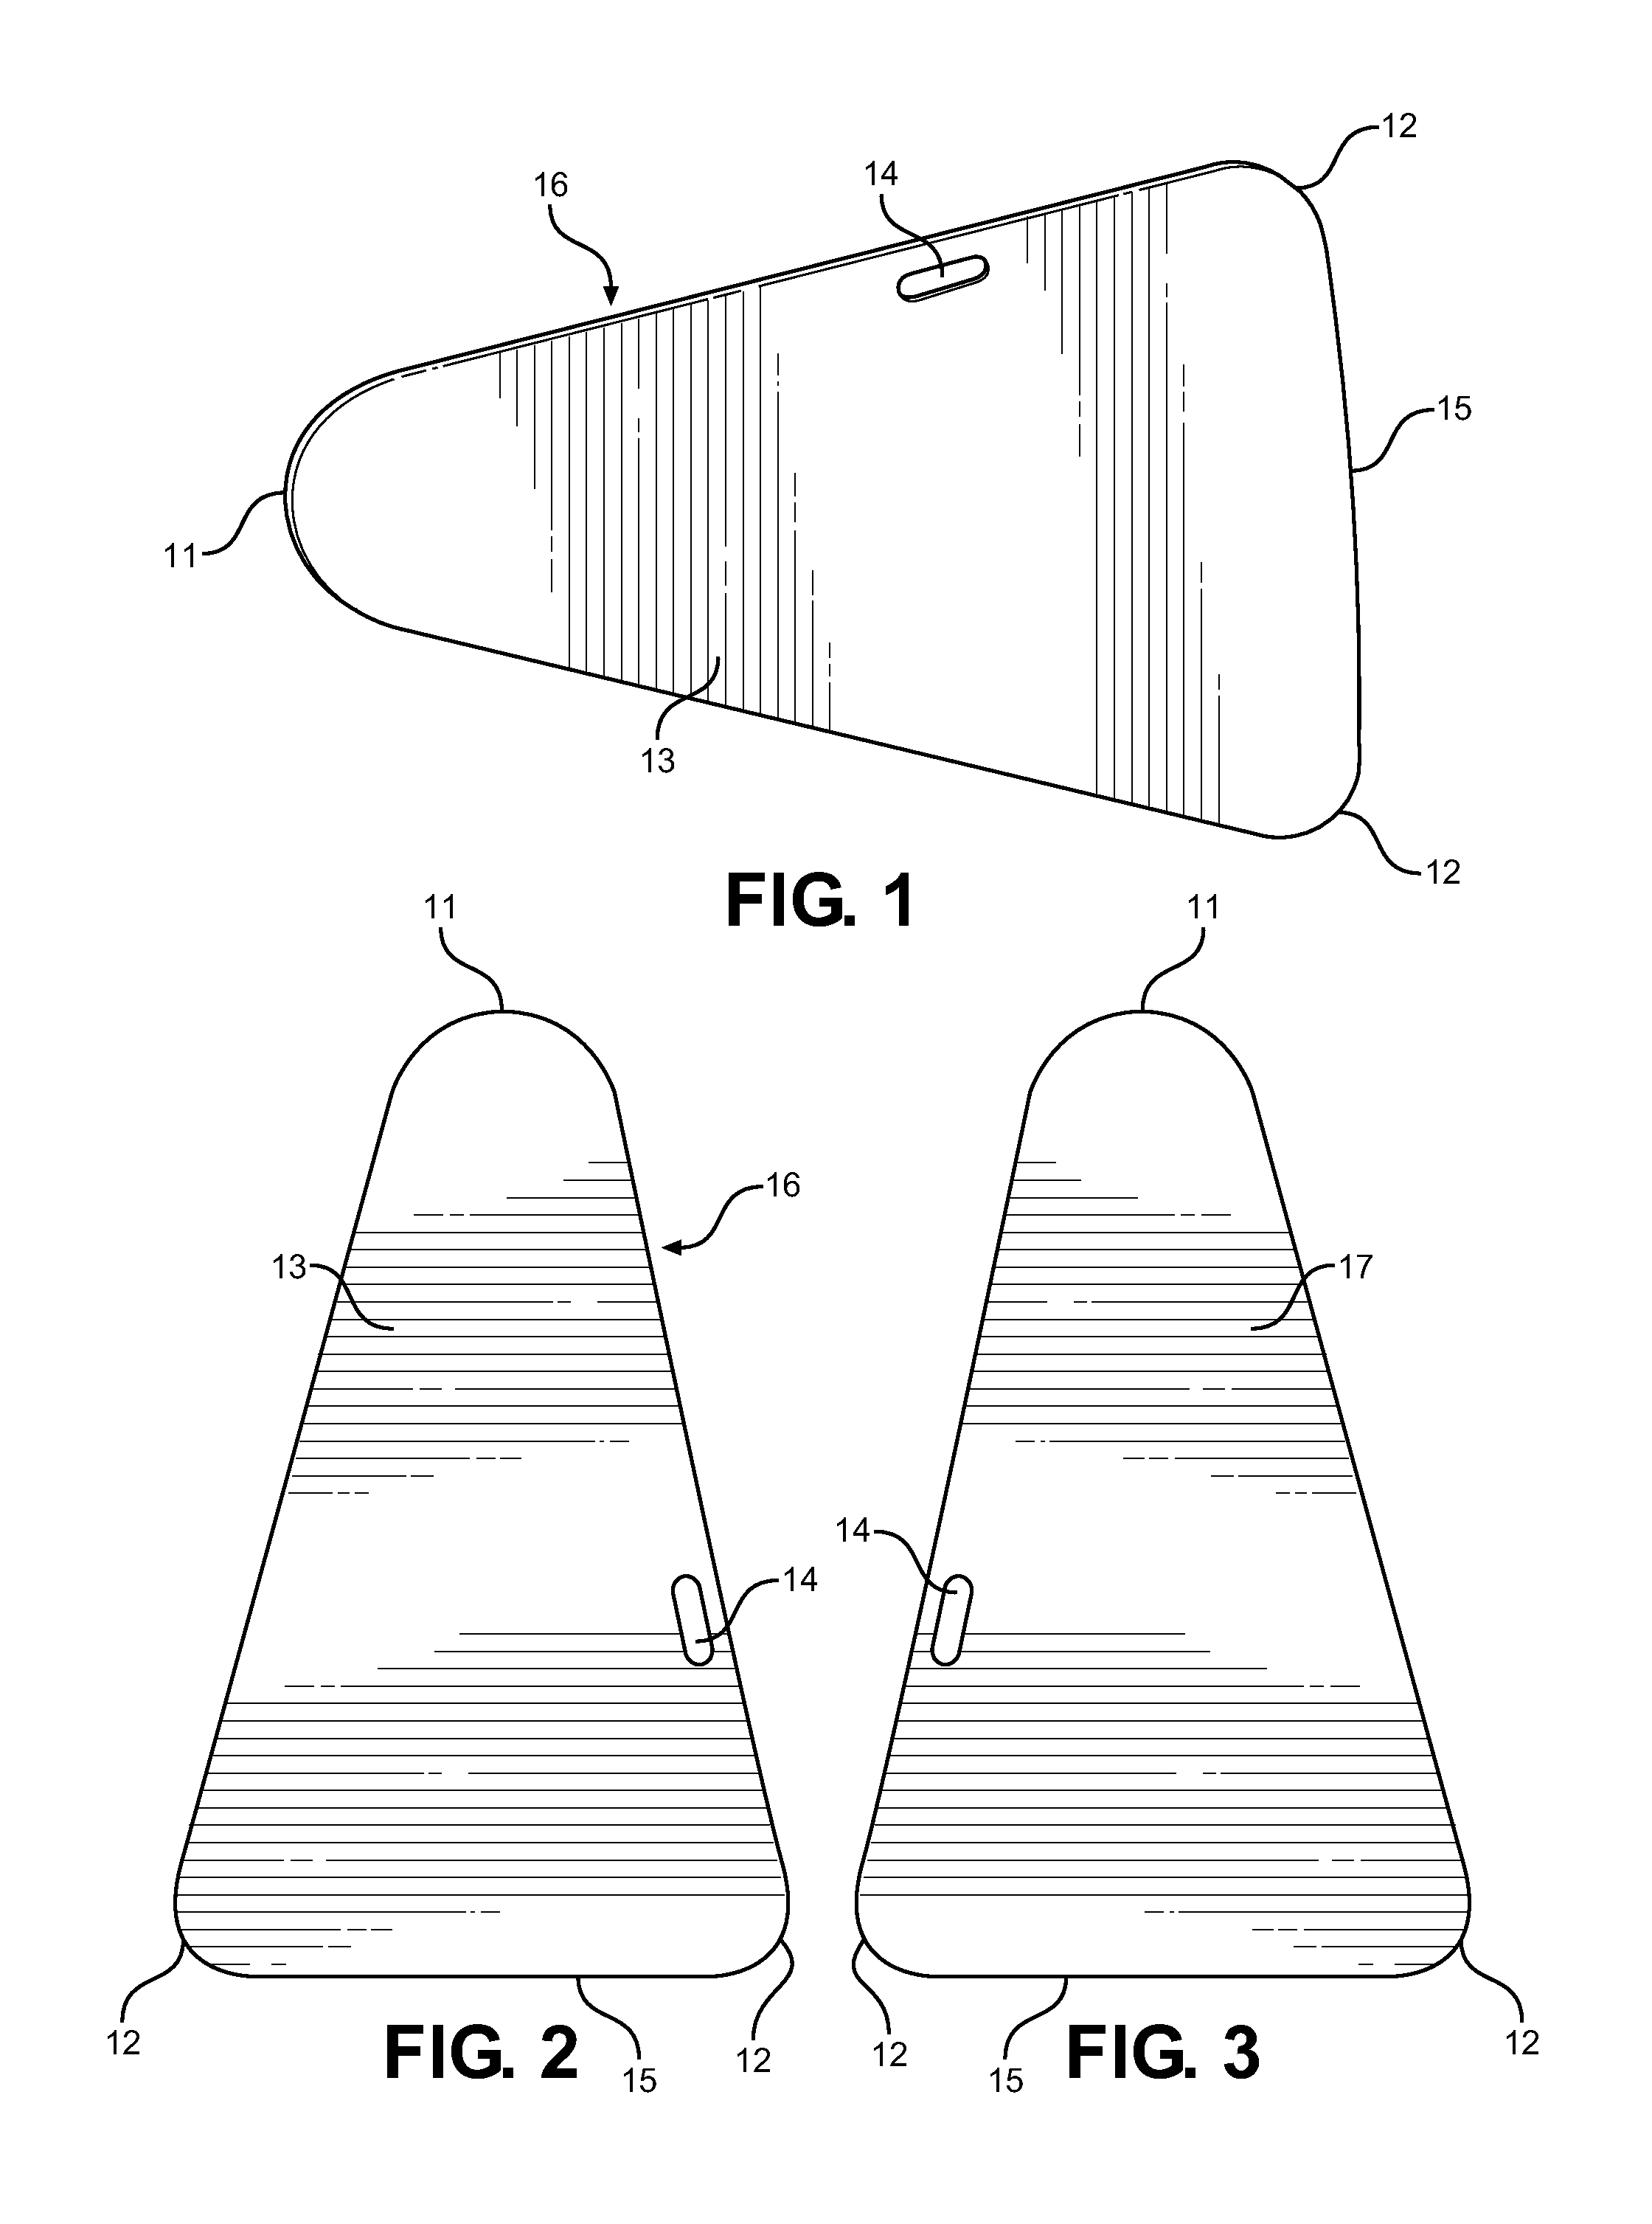 Rehabilitation and physical therapy device